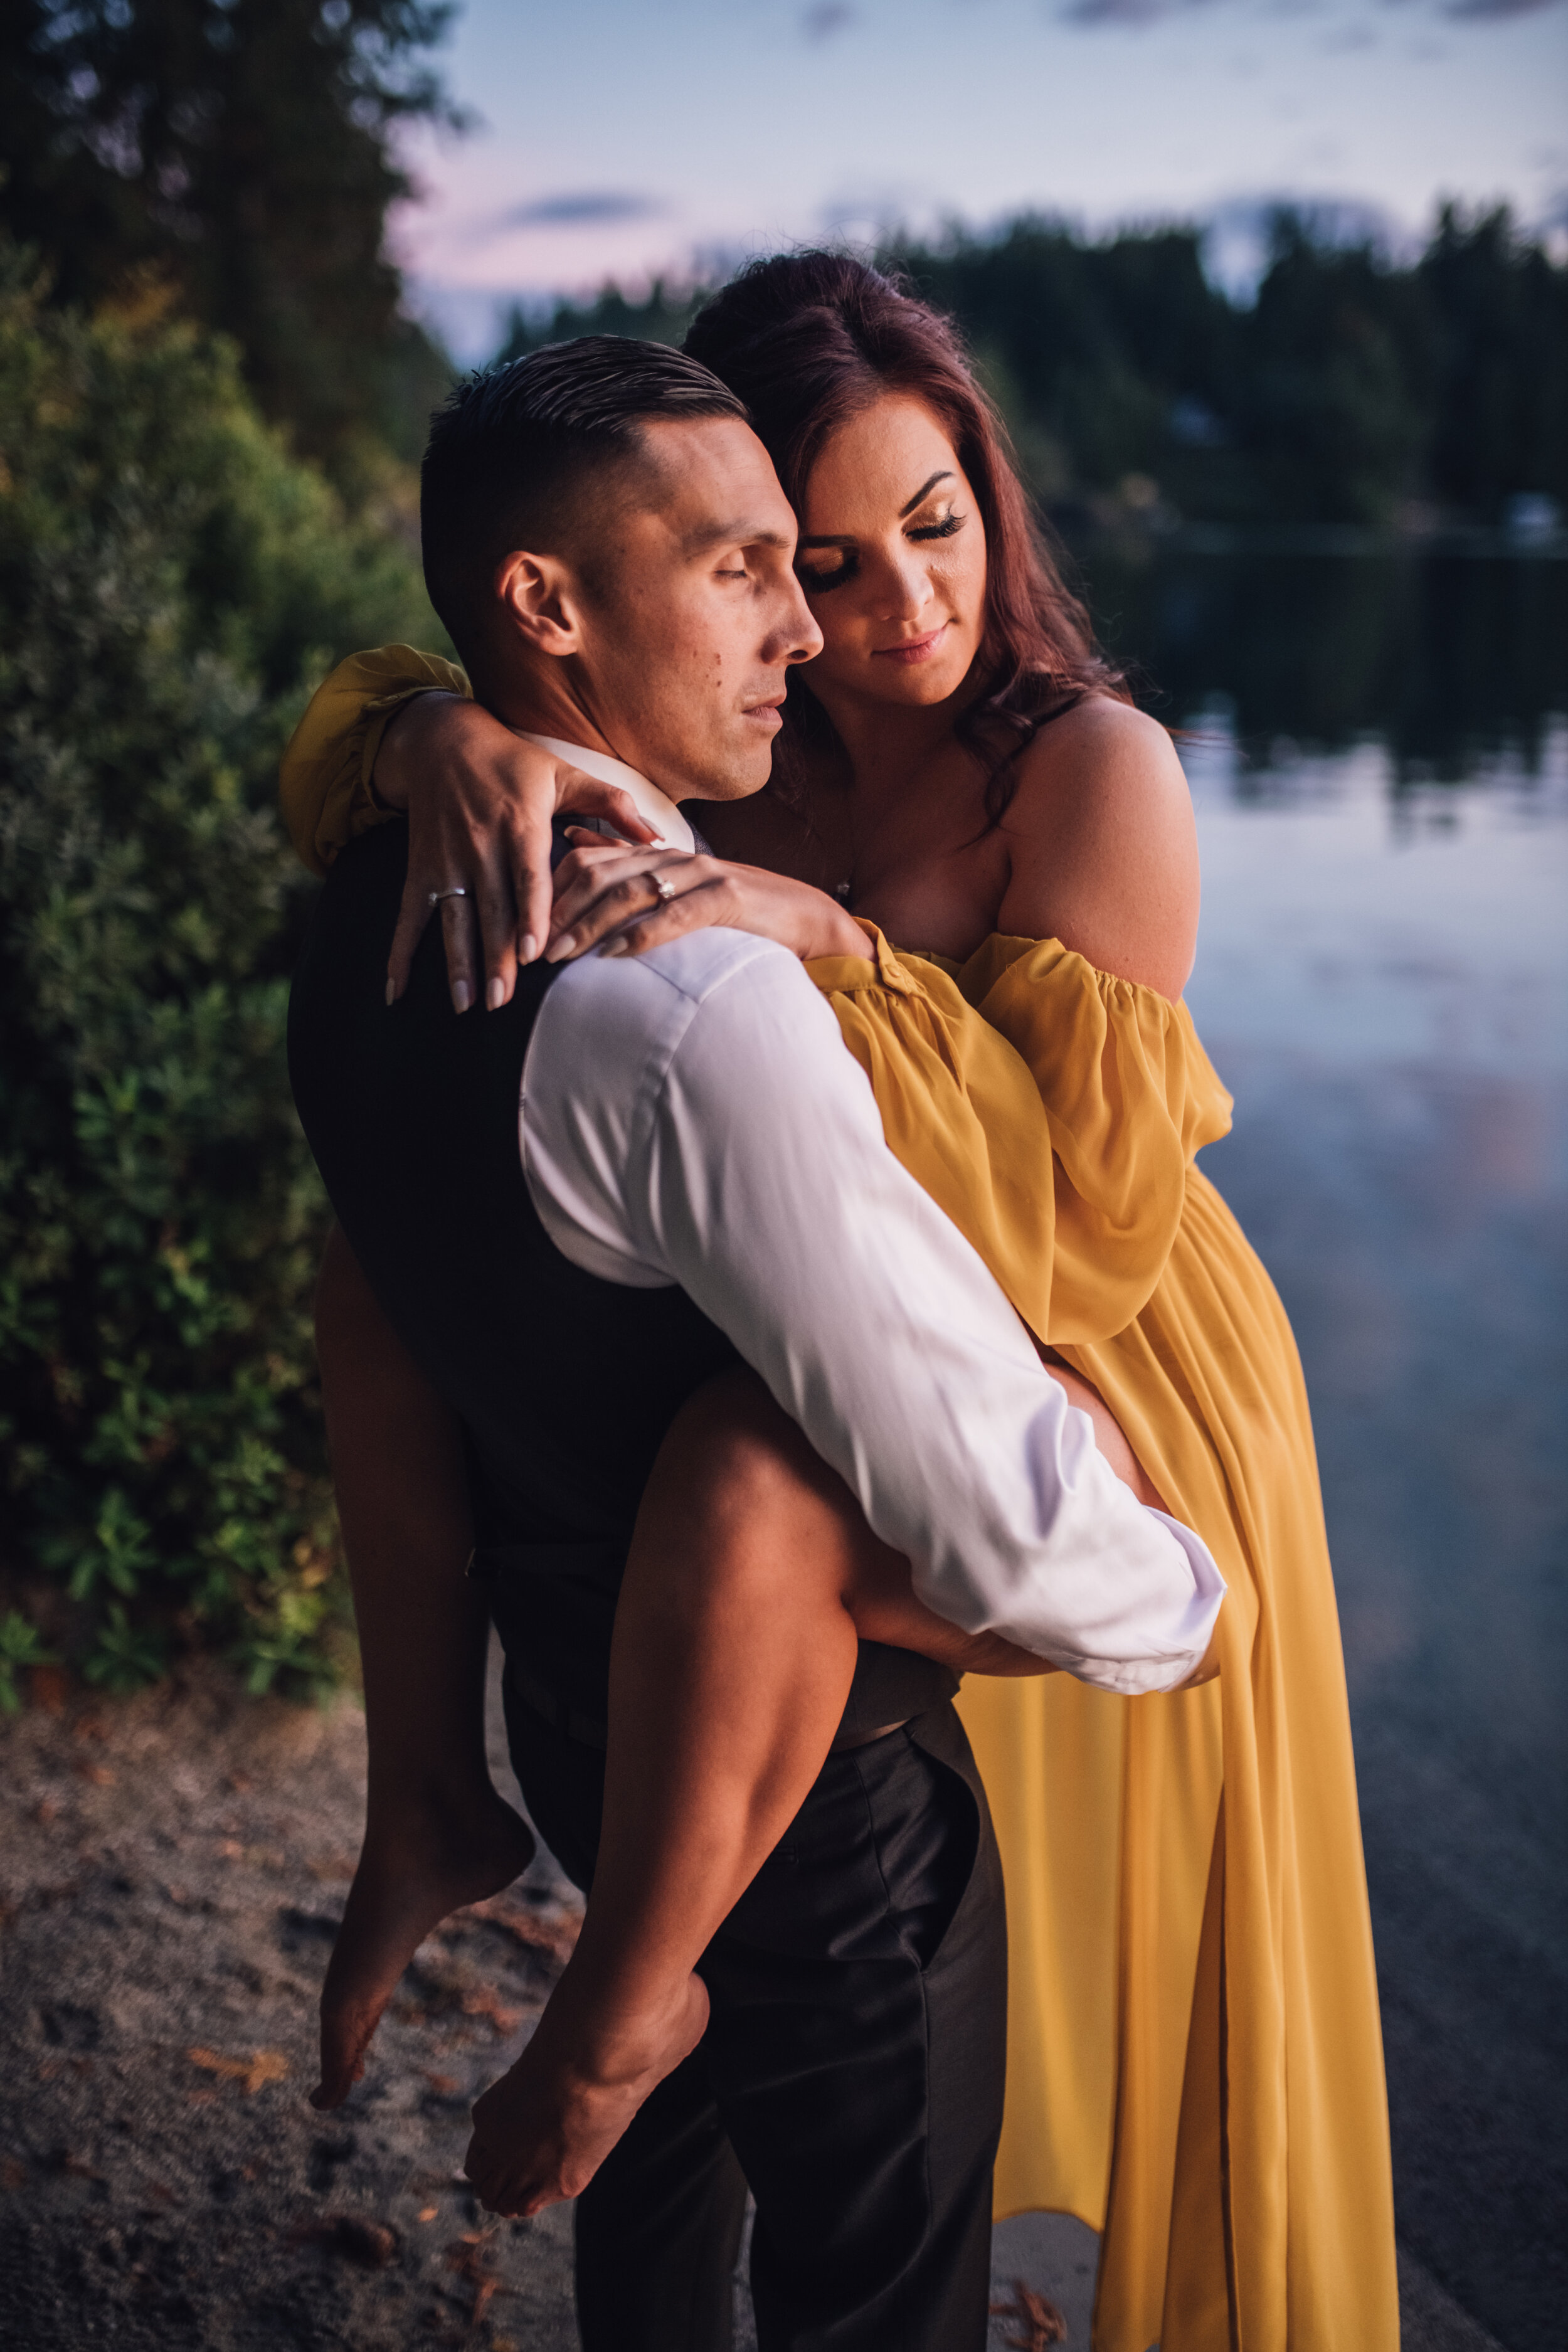 Caitlin & Kevin - Ruby Lake Engagement Session - Pender Harbour, BC - Laura Olson Photography - Sunshine Coast BC Wedding & Elopement Photographer-9004.jpg